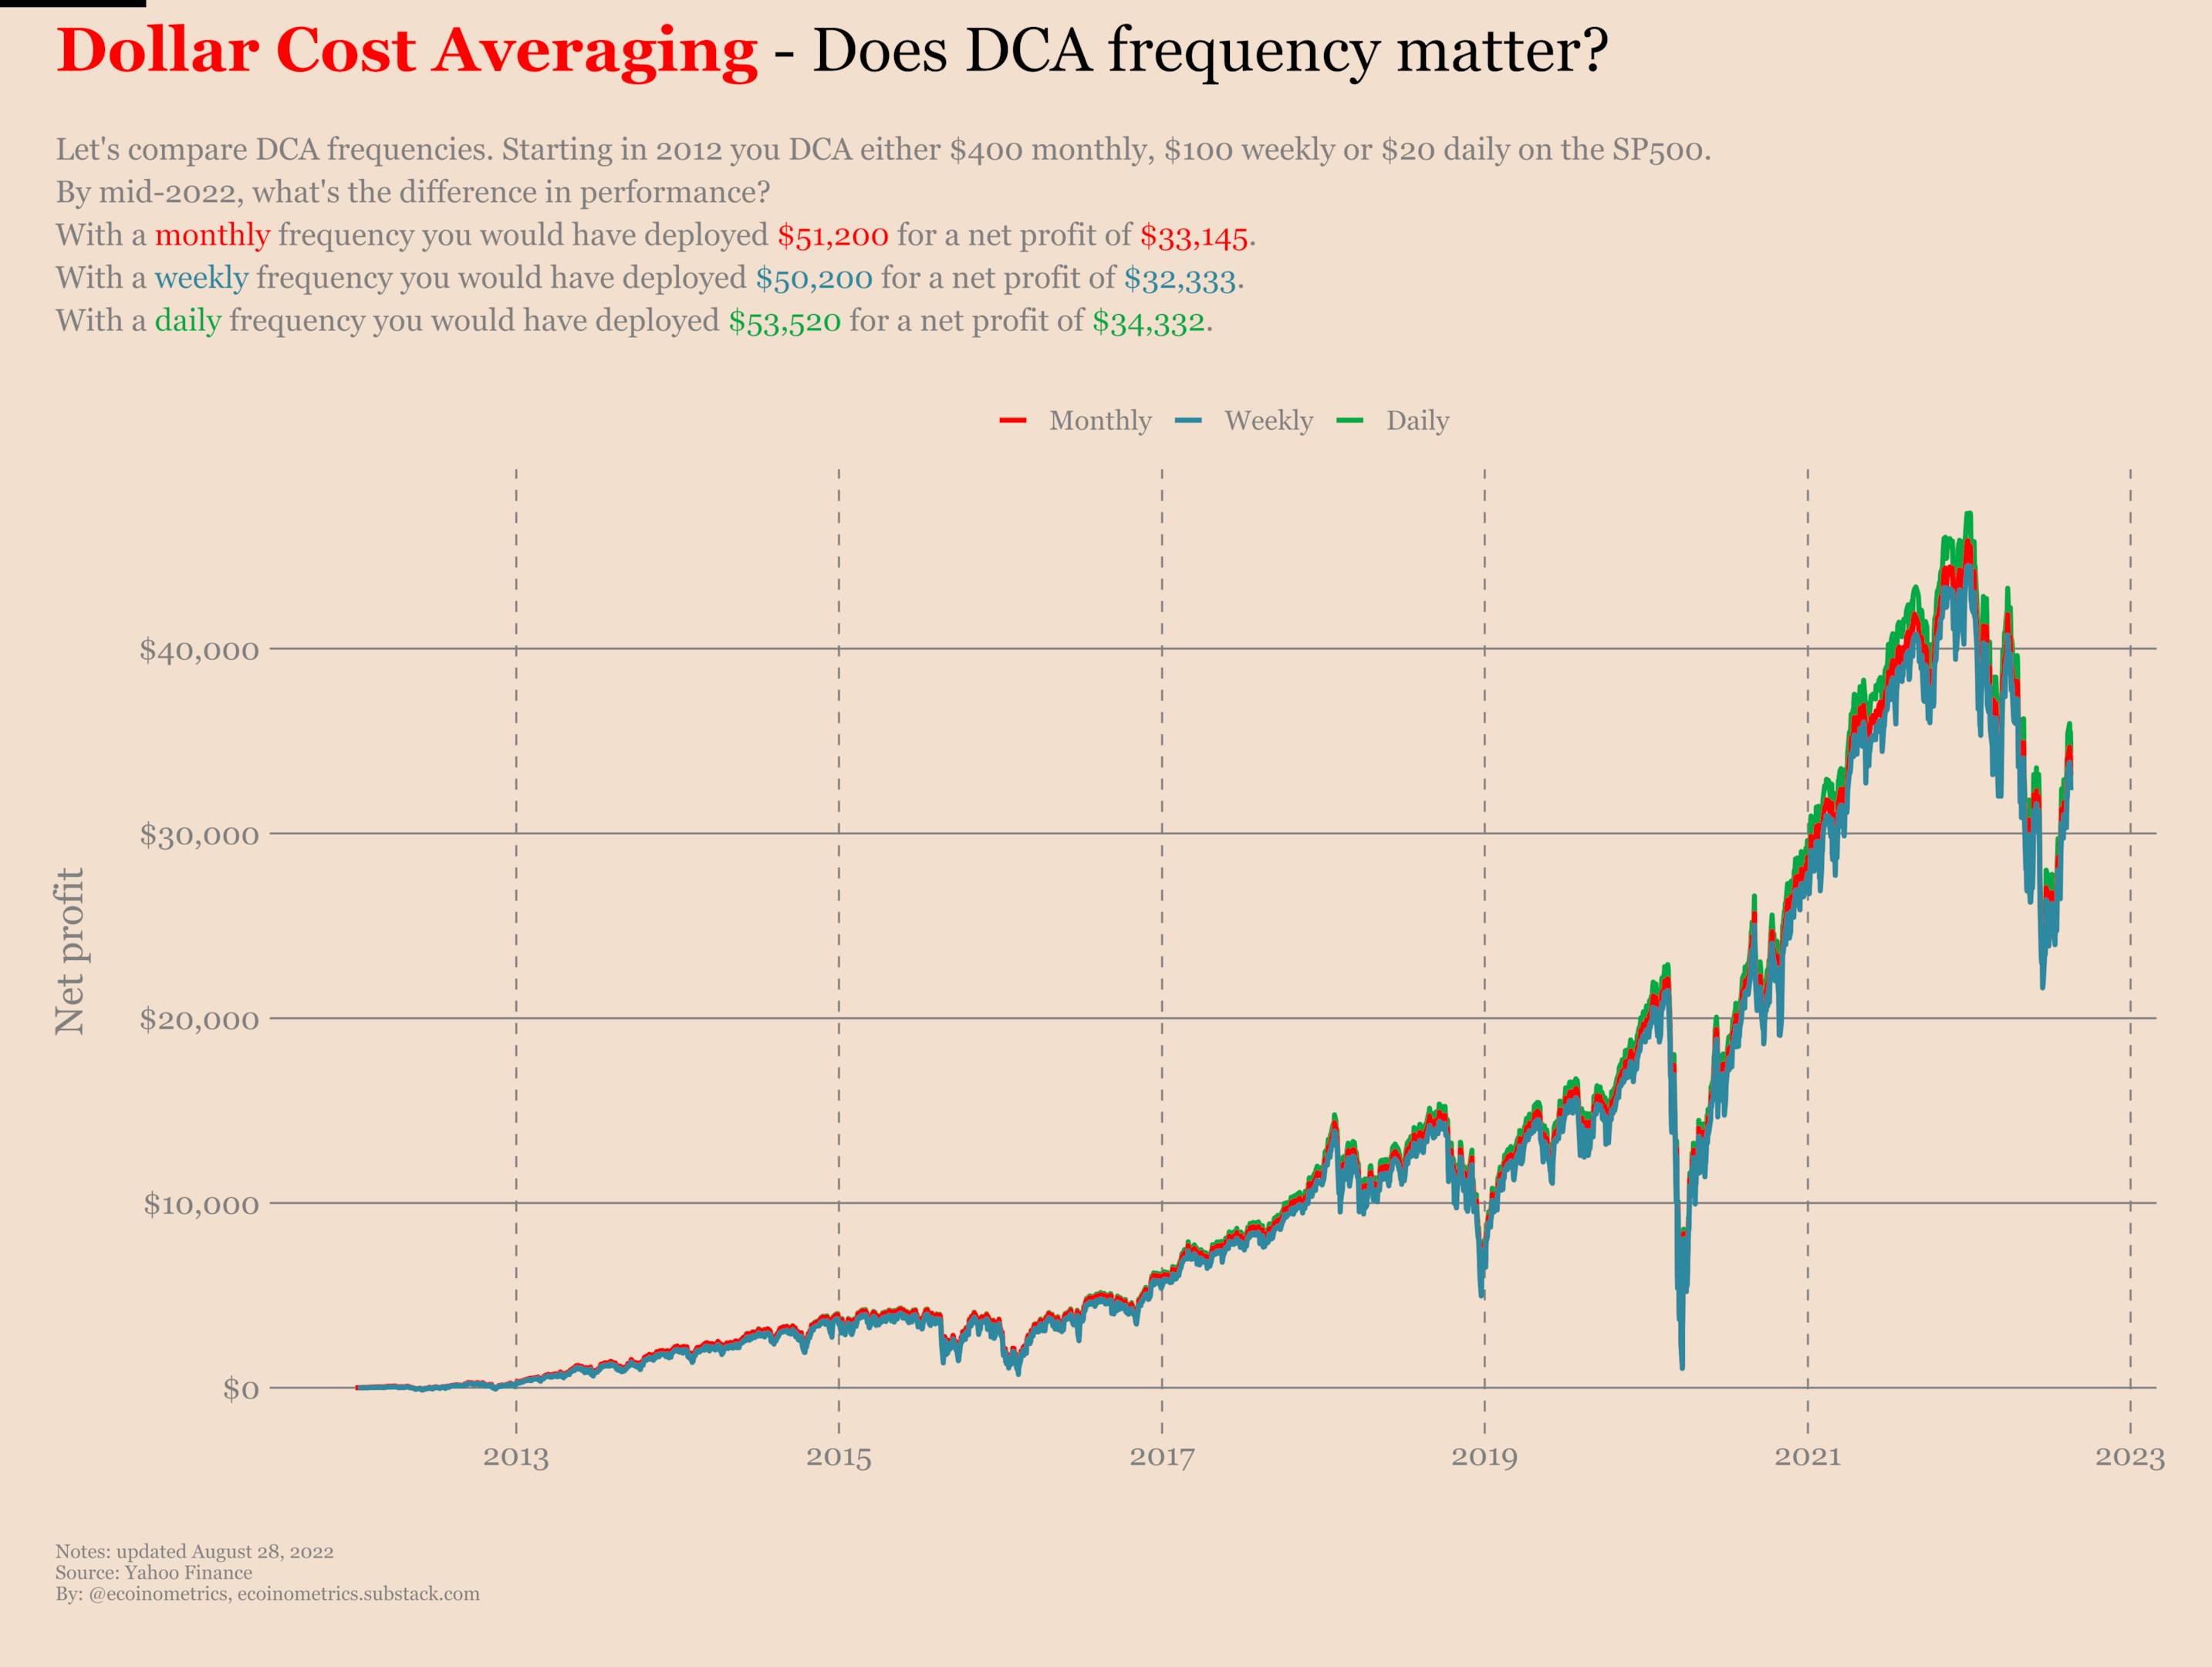 Comparing the performance dollar cost averaging daily, weekly and monthly.